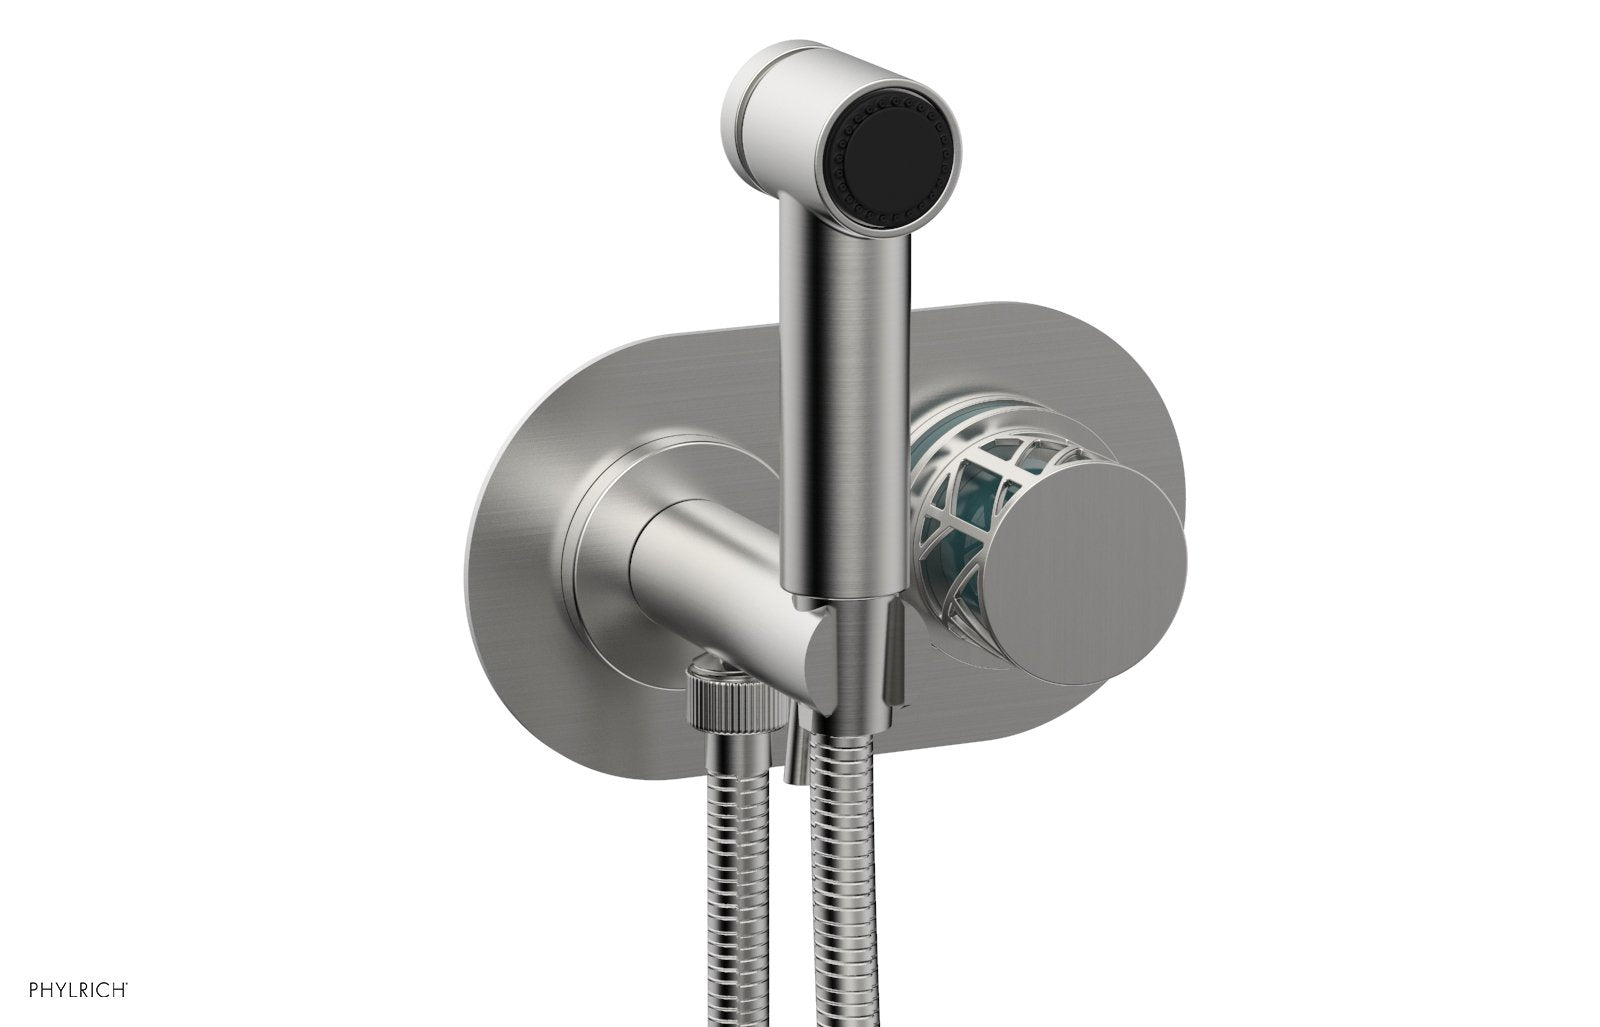 Phylrich JOLIE Wall Mounted Bidet, Round Handle with "Turquoise" Accents